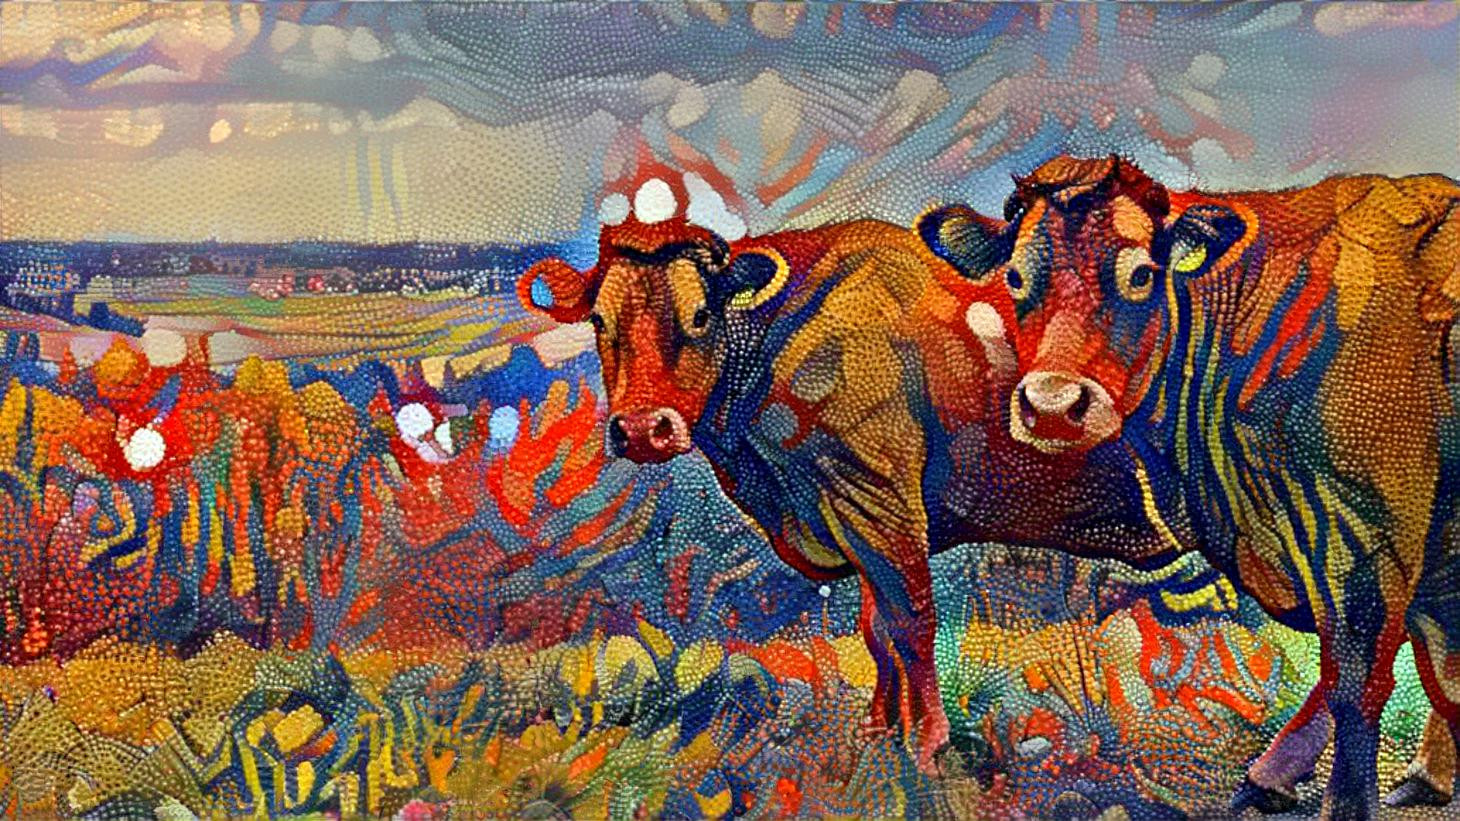 Two Cows / image: Pexel